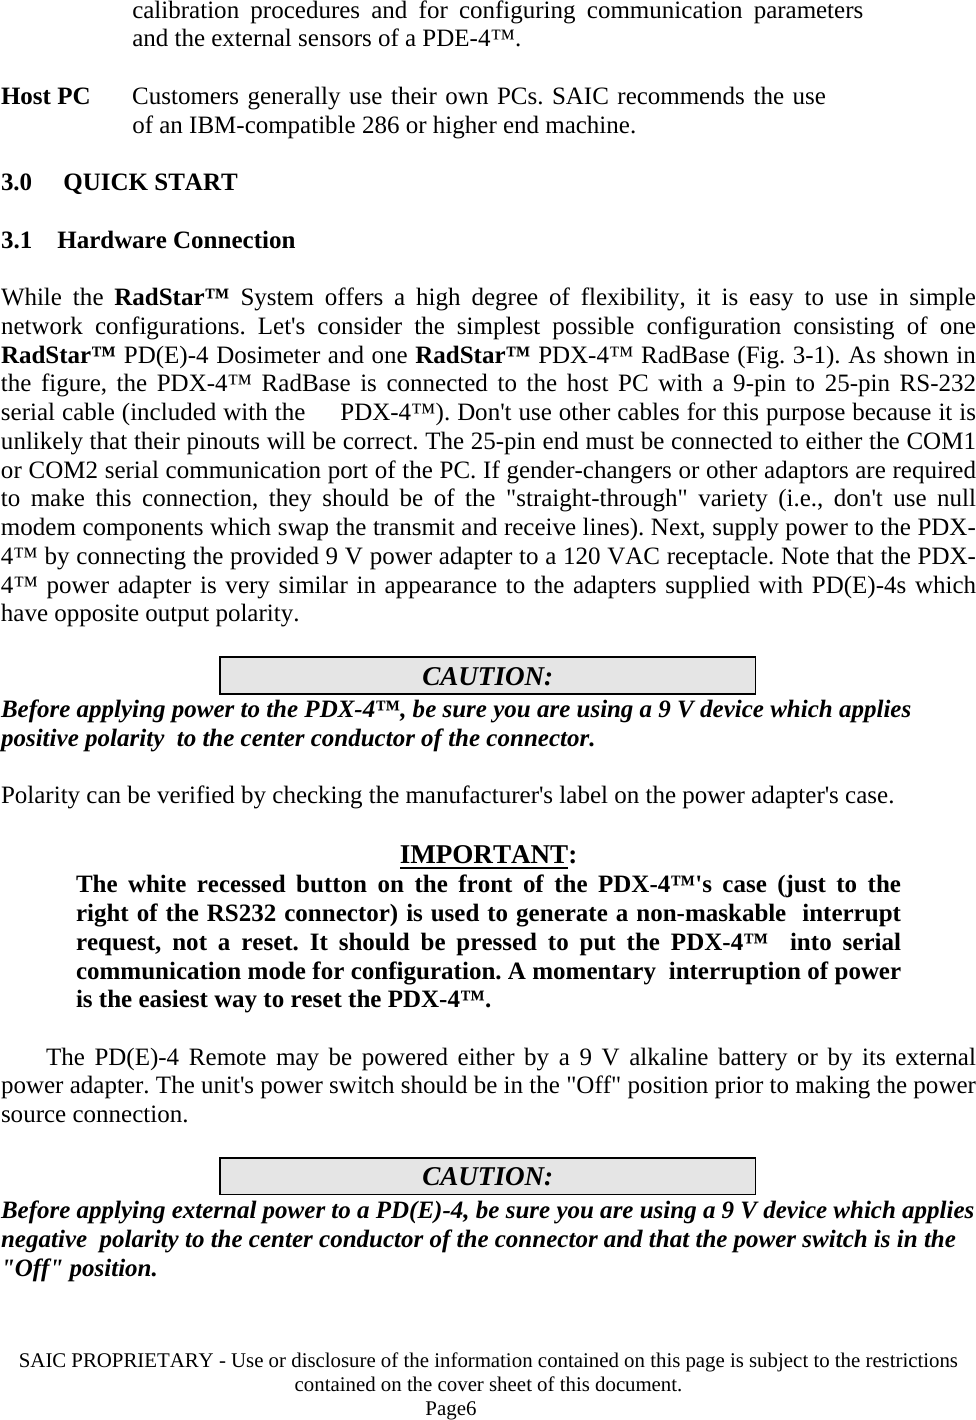 SAIC PROPRIETARY - Use or disclosure of the information contained on this page is subject to the restrictions contained on the cover sheet of this document.    Page6 calibration procedures and for configuring communication parameters and the external sensors of a PDE-4™.  Host PC   Customers generally use their own PCs. SAIC recommends the use of an IBM-compatible 286 or higher end machine.  3.0     QUICK START  3.1    Hardware Connection  While the RadStar™ System offers a high degree of flexibility, it is easy to use in simple network configurations. Let&apos;s consider the simplest possible configuration consisting of one RadStar™ PD(E)-4 Dosimeter and one RadStar™ PDX-4™ RadBase (Fig. 3-1). As shown in the figure, the PDX-4™ RadBase is connected to the host PC with a 9-pin to 25-pin RS-232 serial cable (included with the     PDX-4™). Don&apos;t use other cables for this purpose because it is unlikely that their pinouts will be correct. The 25-pin end must be connected to either the COM1 or COM2 serial communication port of the PC. If gender-changers or other adaptors are required to make this connection, they should be of the &quot;straight-through&quot; variety (i.e., don&apos;t use null modem components which swap the transmit and receive lines). Next, supply power to the PDX-4™ by connecting the provided 9 V power adapter to a 120 VAC receptacle. Note that the PDX-4™ power adapter is very similar in appearance to the adapters supplied with PD(E)-4s which have opposite output polarity.  CAUTION: Before applying power to the PDX-4™, be sure you are using a 9 V device which applies positive polarity  to the center conductor of the connector.  Polarity can be verified by checking the manufacturer&apos;s label on the power adapter&apos;s case.  IMPORTANT: The white recessed button on the front of the PDX-4™&apos;s case (just to the  right of the RS232 connector) is used to generate a non-maskable  interrupt request, not a reset. It should be pressed to put the PDX-4™  into serial communication mode for configuration. A momentary  interruption of power is the easiest way to reset the PDX-4™.    The PD(E)-4 Remote may be powered either by a 9 V alkaline battery or by its external power adapter. The unit&apos;s power switch should be in the &quot;Off&quot; position prior to making the power source connection.  CAUTION: Before applying external power to a PD(E)-4, be sure you are using a 9 V device which applies negative  polarity to the center conductor of the connector and that the power switch is in the &quot;Off&quot; position.   